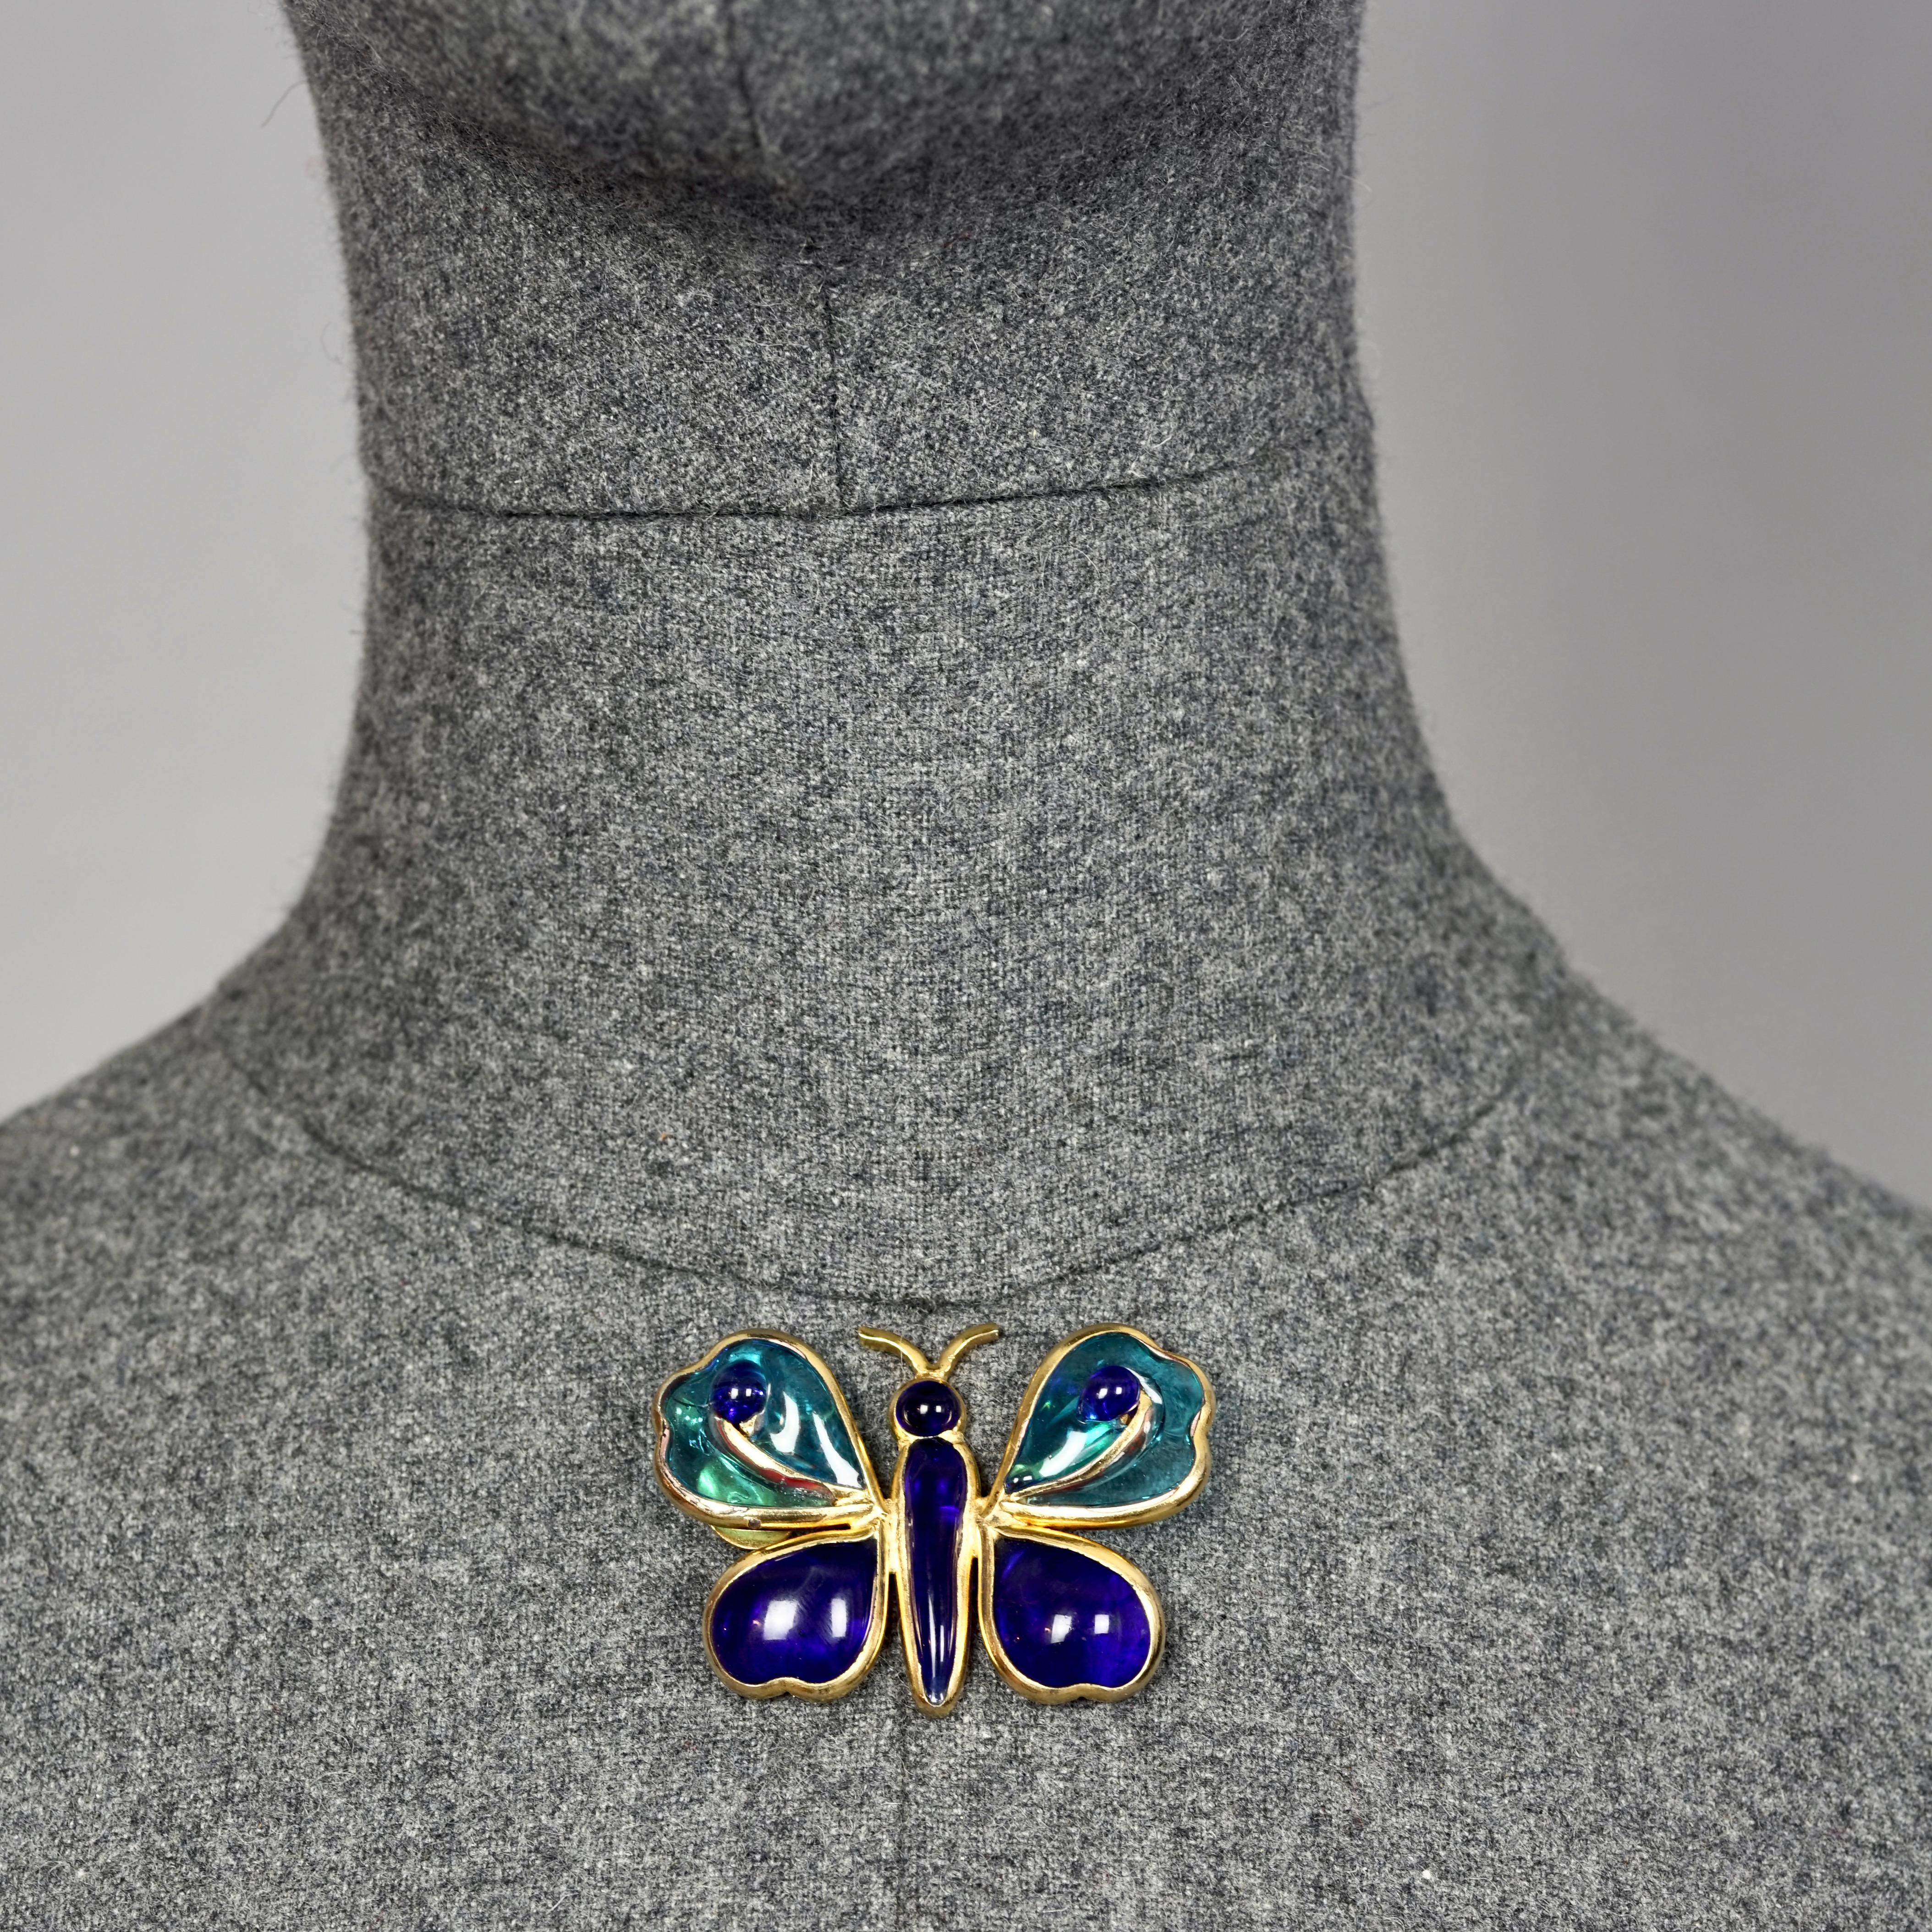 Vintage YVES SAINT LAURENT Ysl Maison Gripoix Butterfly Brooch

Measurements:
Height: 1.57 inches (4 cm)
Width: 1.96 inches (5 cm)

Features:
- 100% Authentic YVES SAINT LAURENT.
- Rare butterfly glass/ Gripoix in blue and light blue color.
- Gold